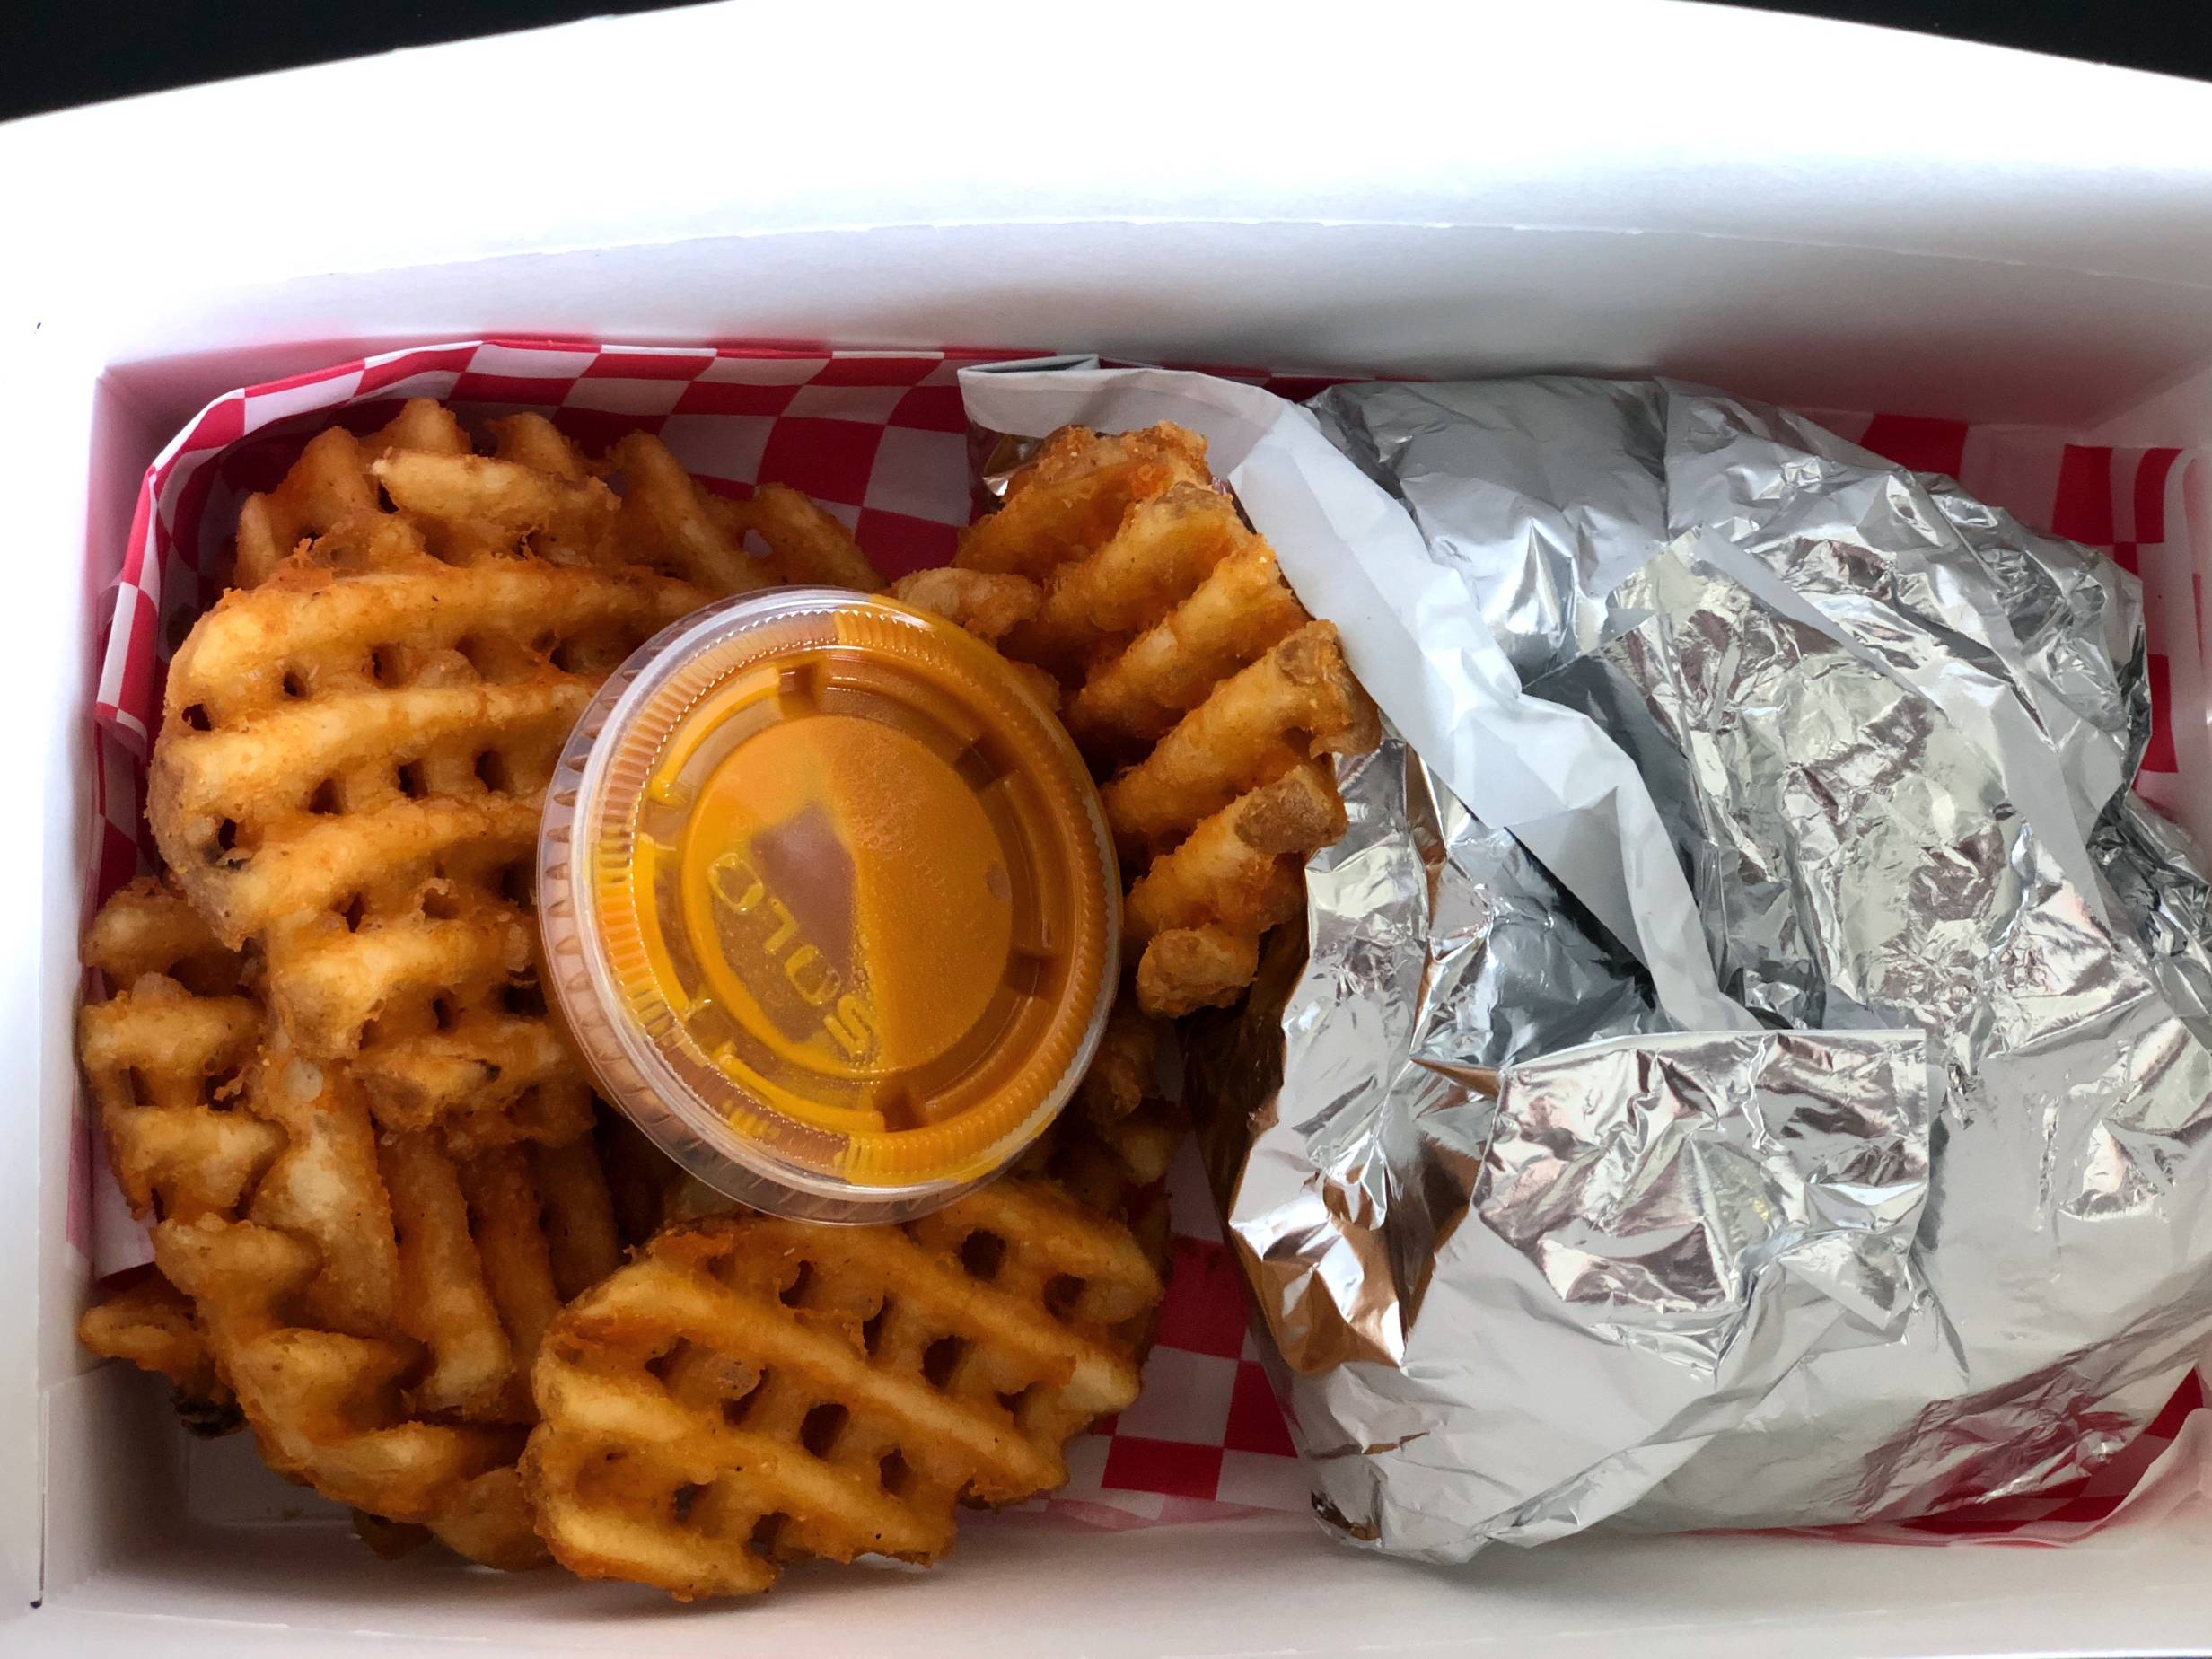 A togo order from Watson's: waffle fries with a small cup of honey mustard sits in a white paper box next to a fried chicken sandwich wrapped in a metallic wrapper. Photo by Alyssa Buckley.